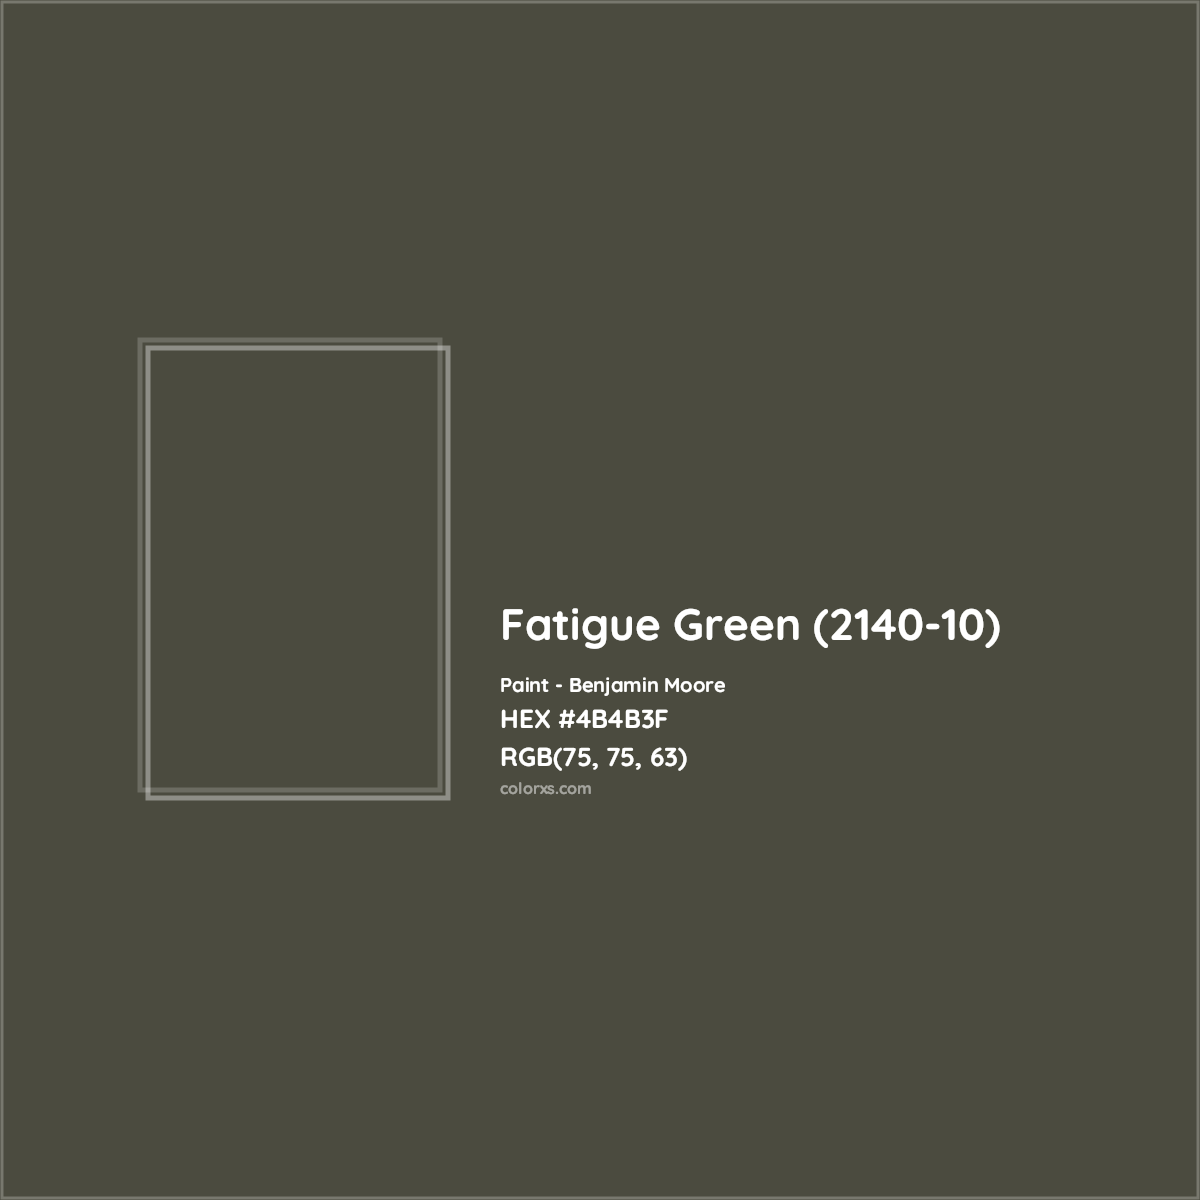 https://www.colorxs.com/img/color/name/fatigue-green-2140-10.png